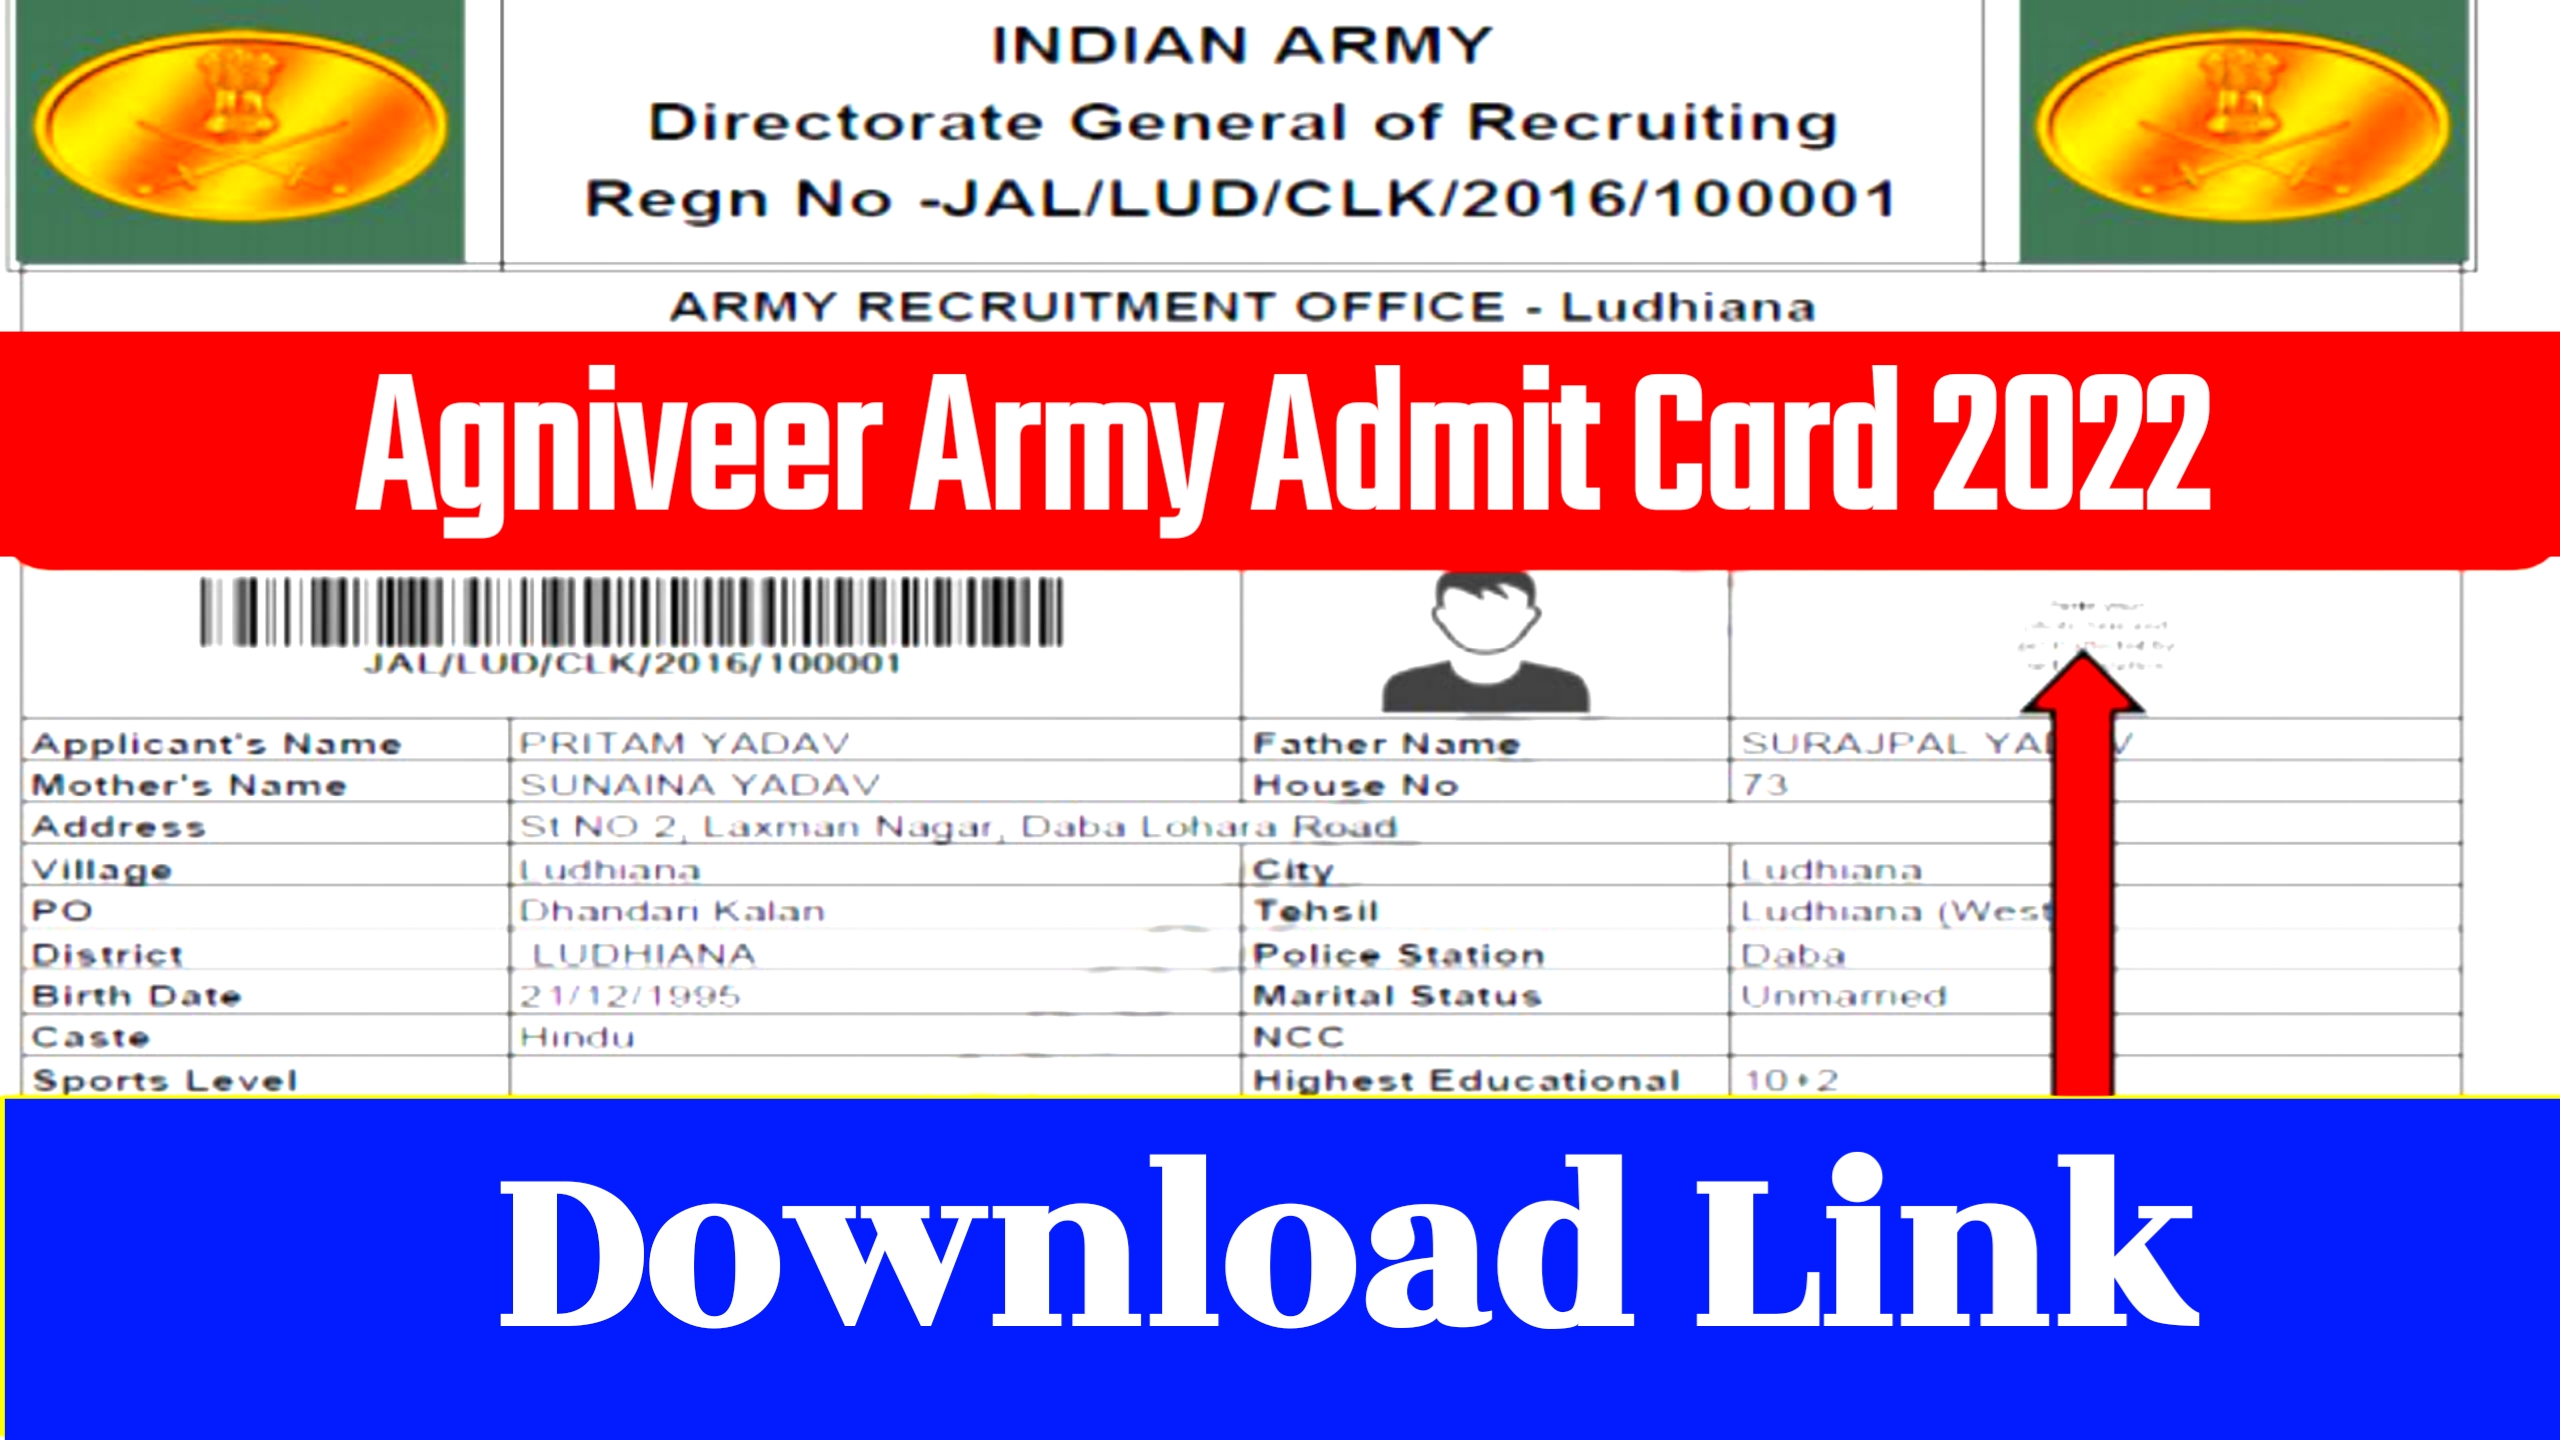 joinindianarmy.nic.in ~ Agniveer Indian Army Admit Card 2022 Download